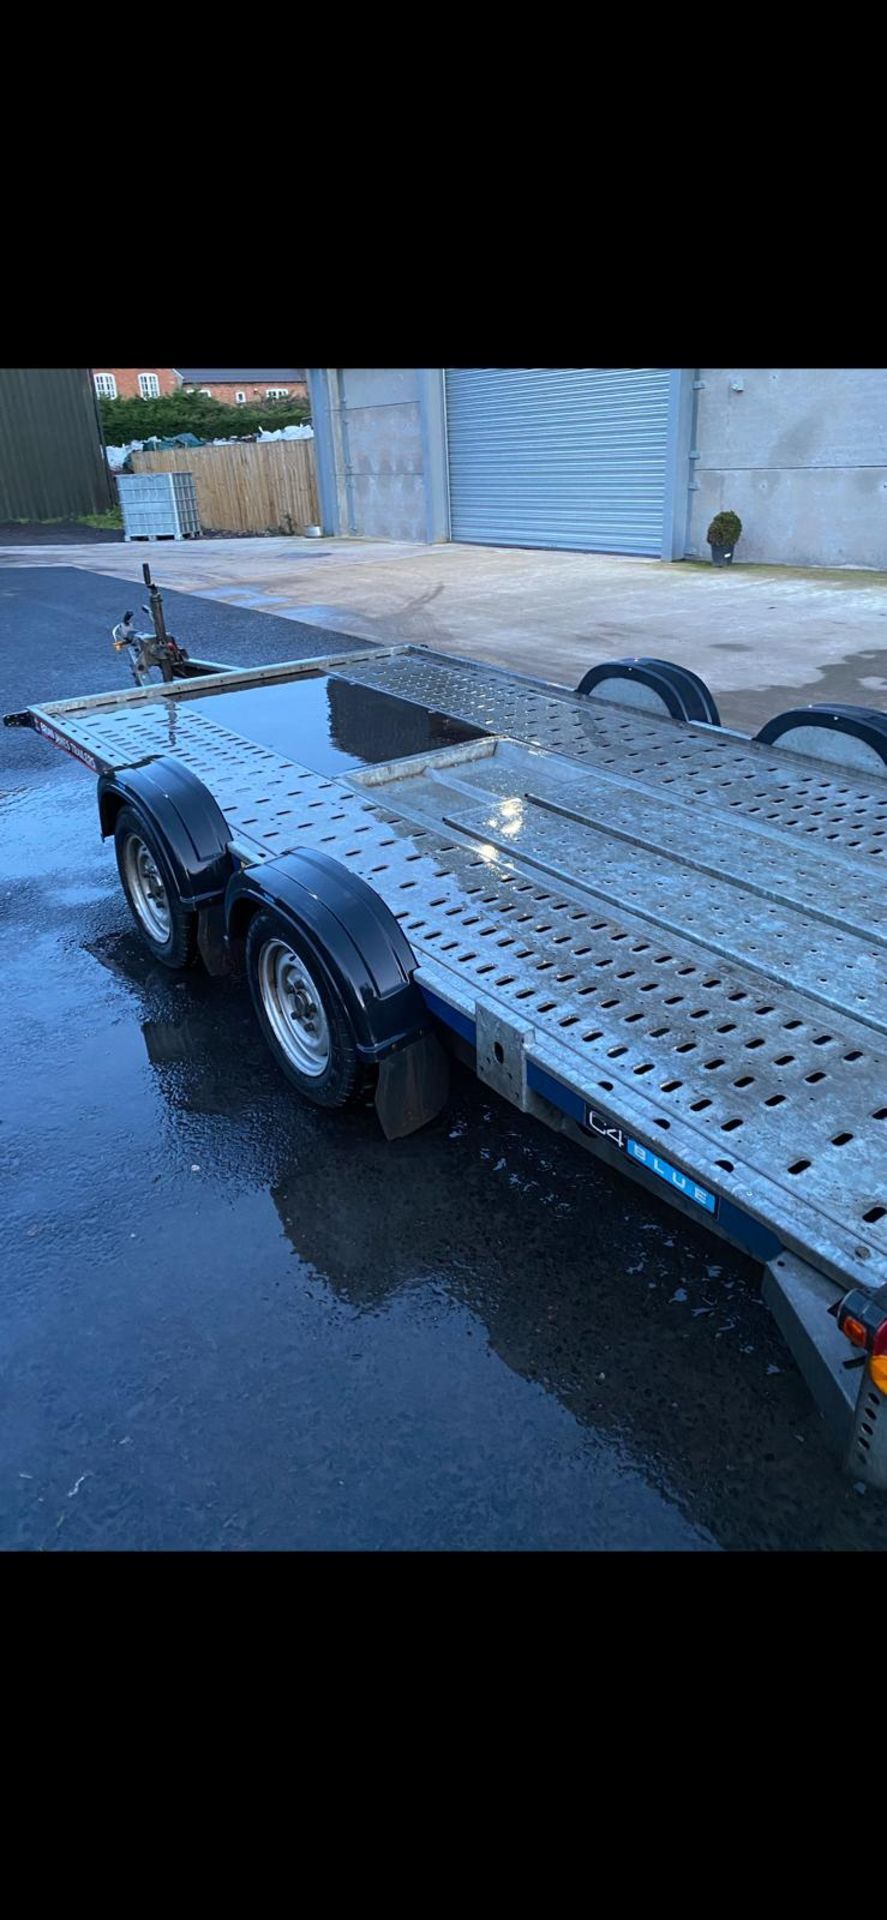 2019 BRIAN JAMES C4 BLUE CAR TRANSPORTER 4M BED LENGTH AND A 2600 KG GROSS CAPACITY *PLUS VAT* - Image 2 of 4